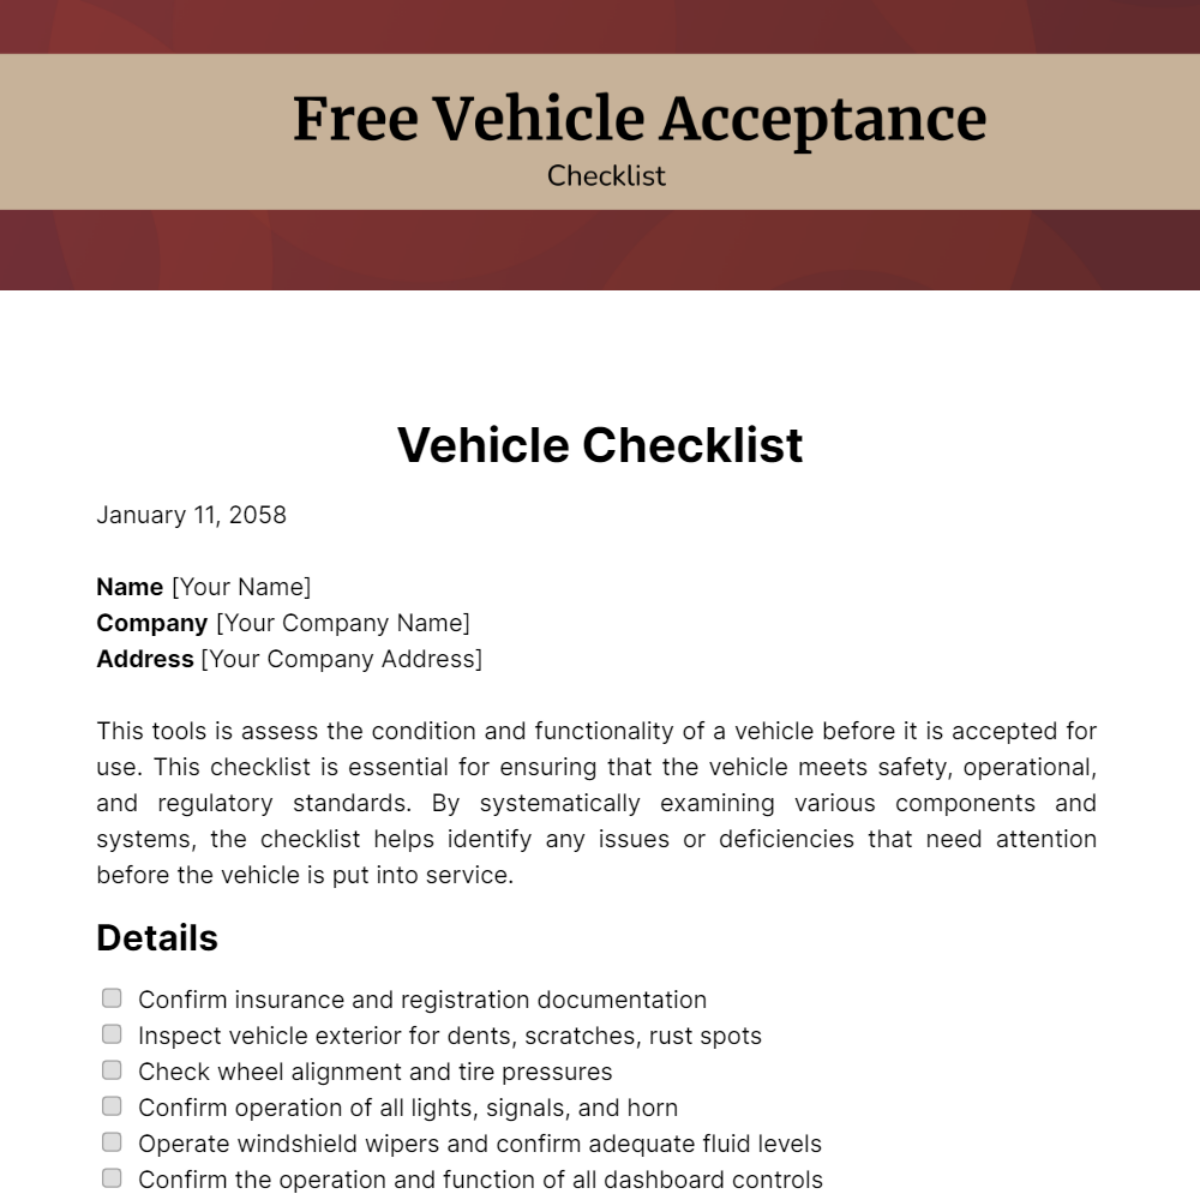 Free Vehicle Acceptance Checklist Template